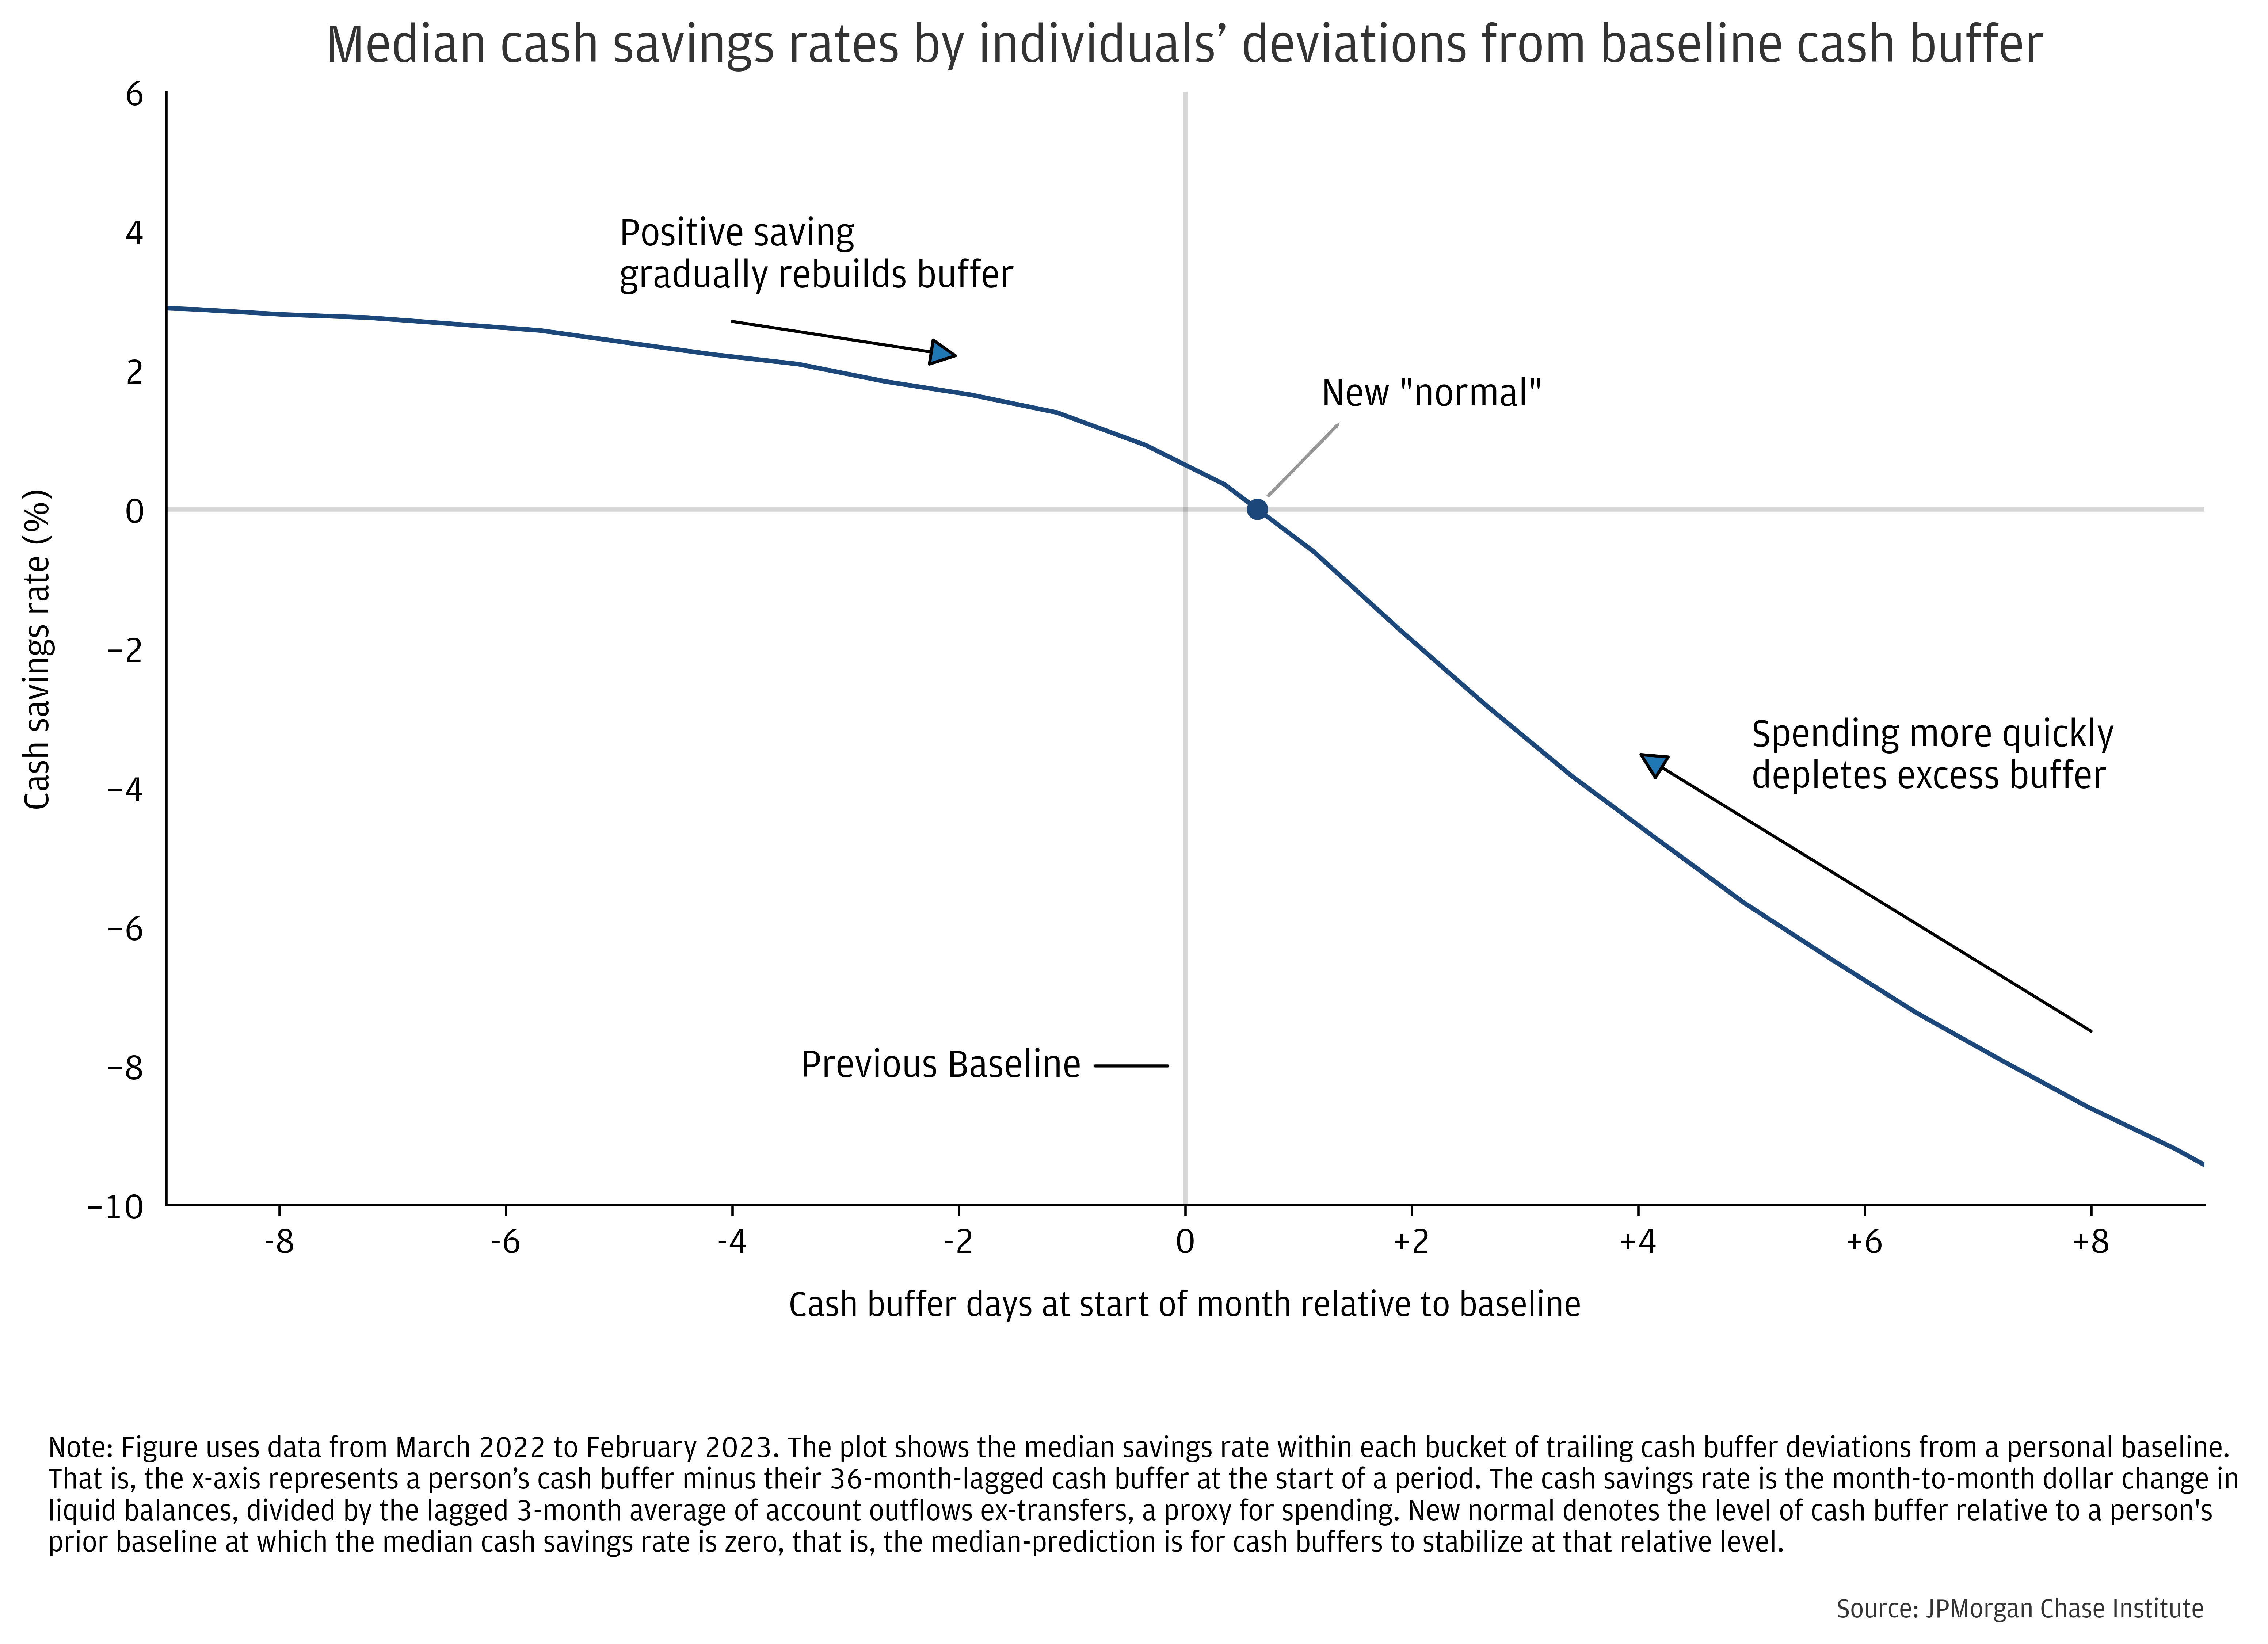 Median cash savings rates by individuals’ deviations from baseline cash buffer: March 2022 to February 2023